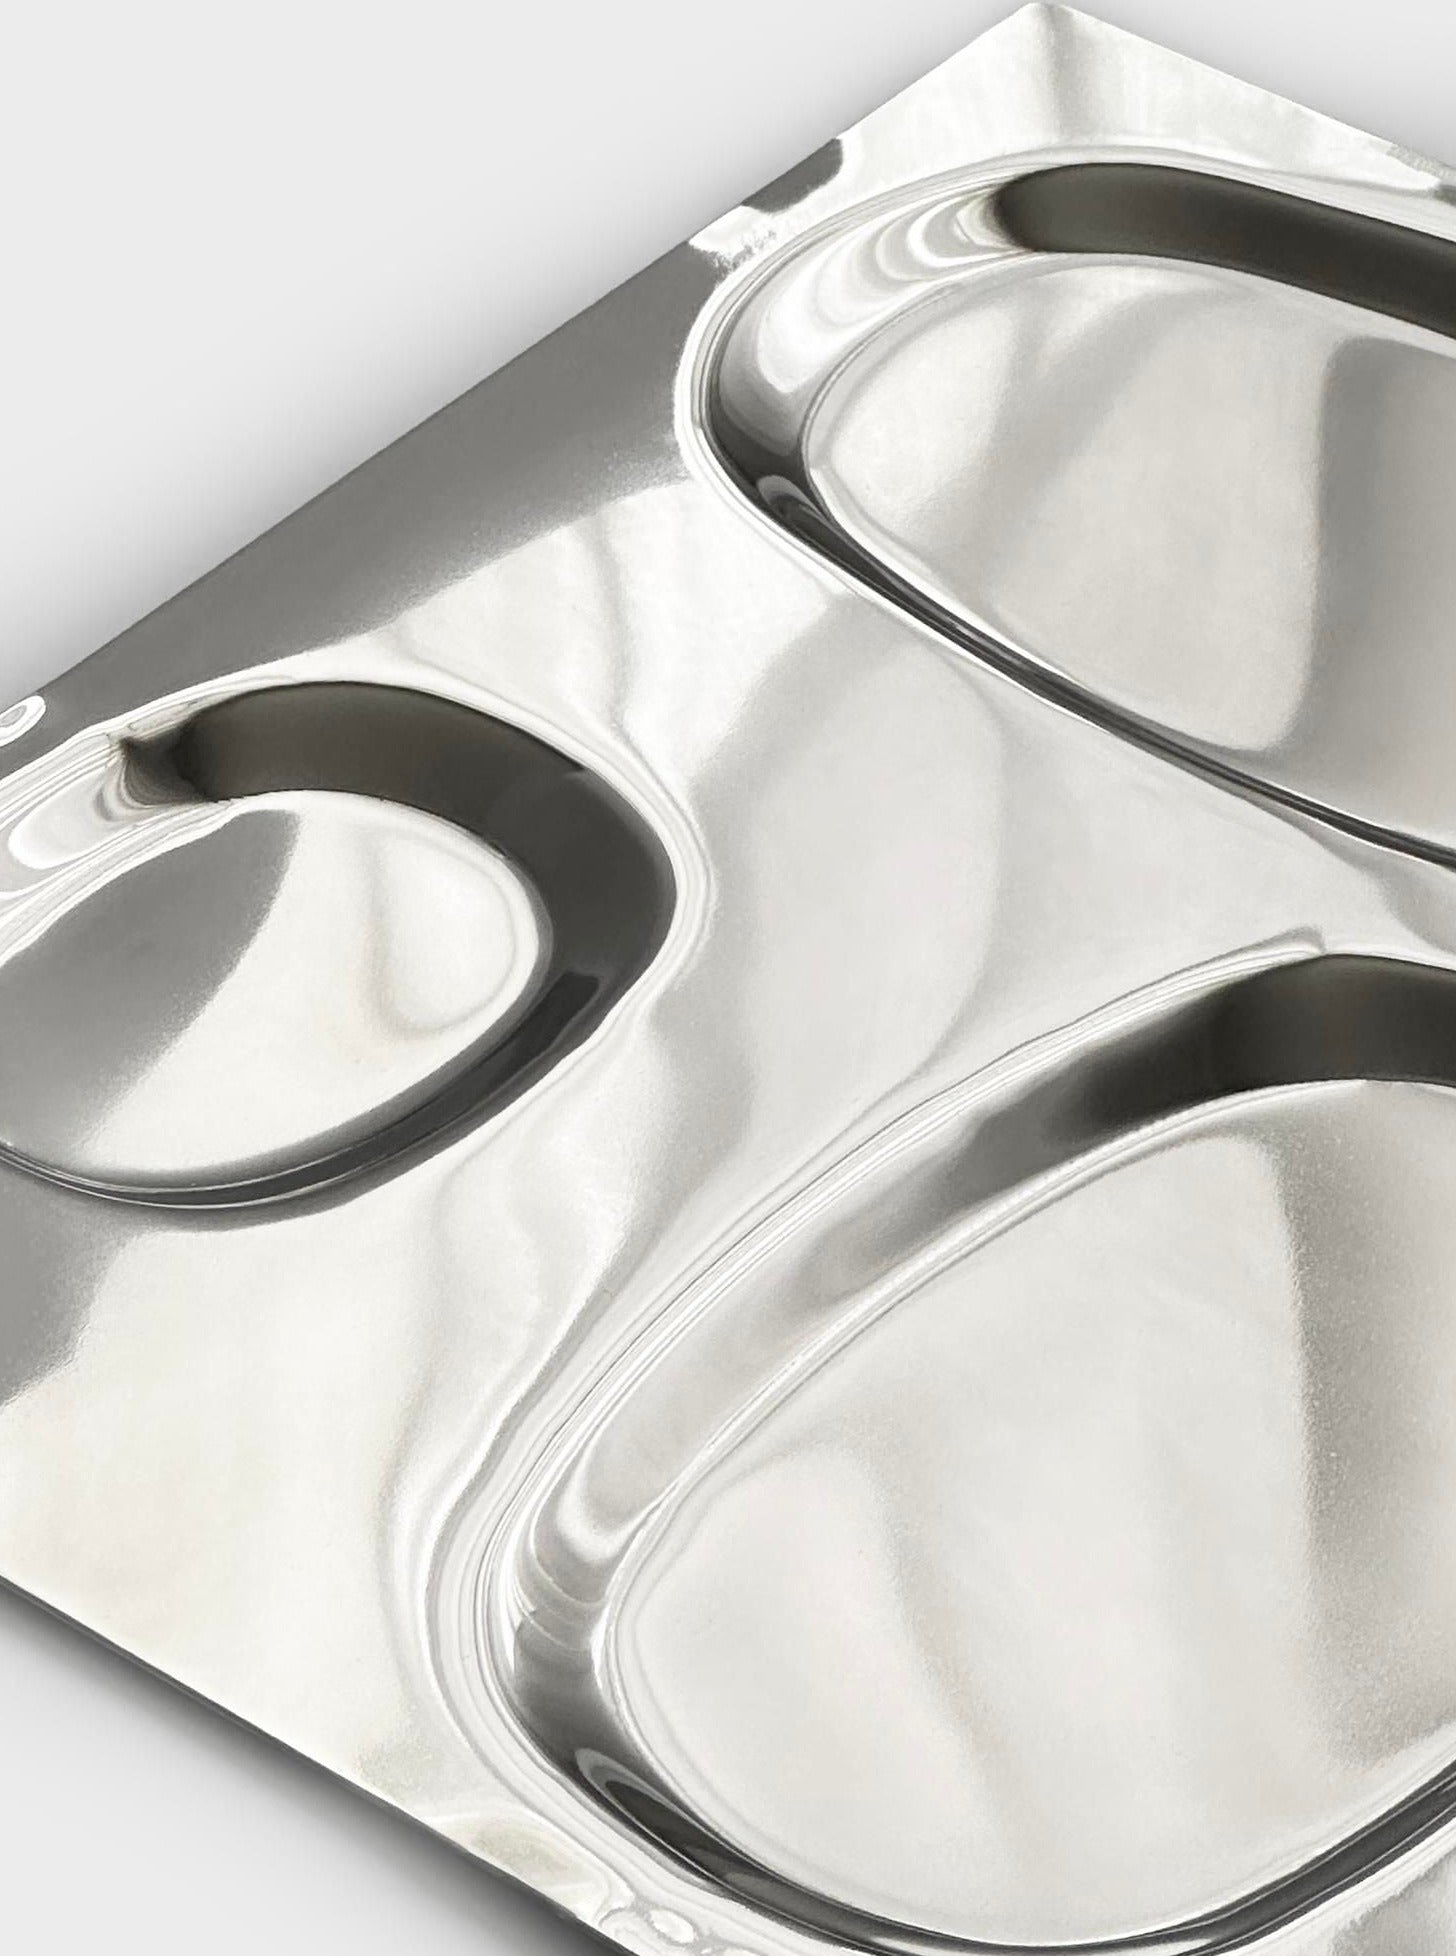 104-2 - Stainless Steel Serving Dish